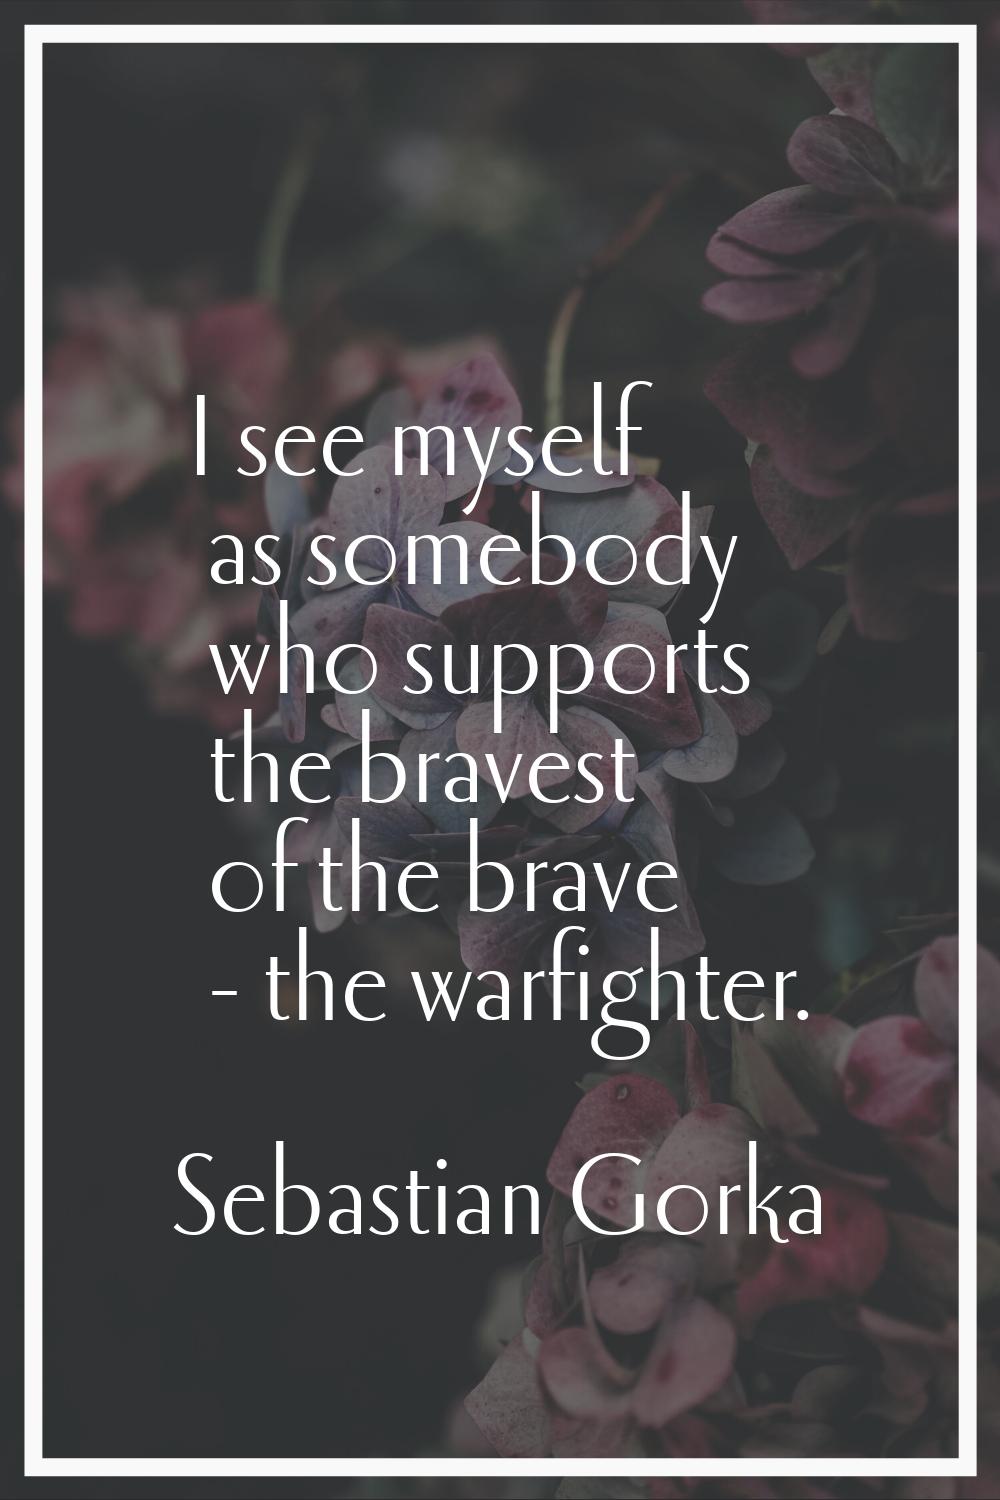 I see myself as somebody who supports the bravest of the brave - the warfighter.